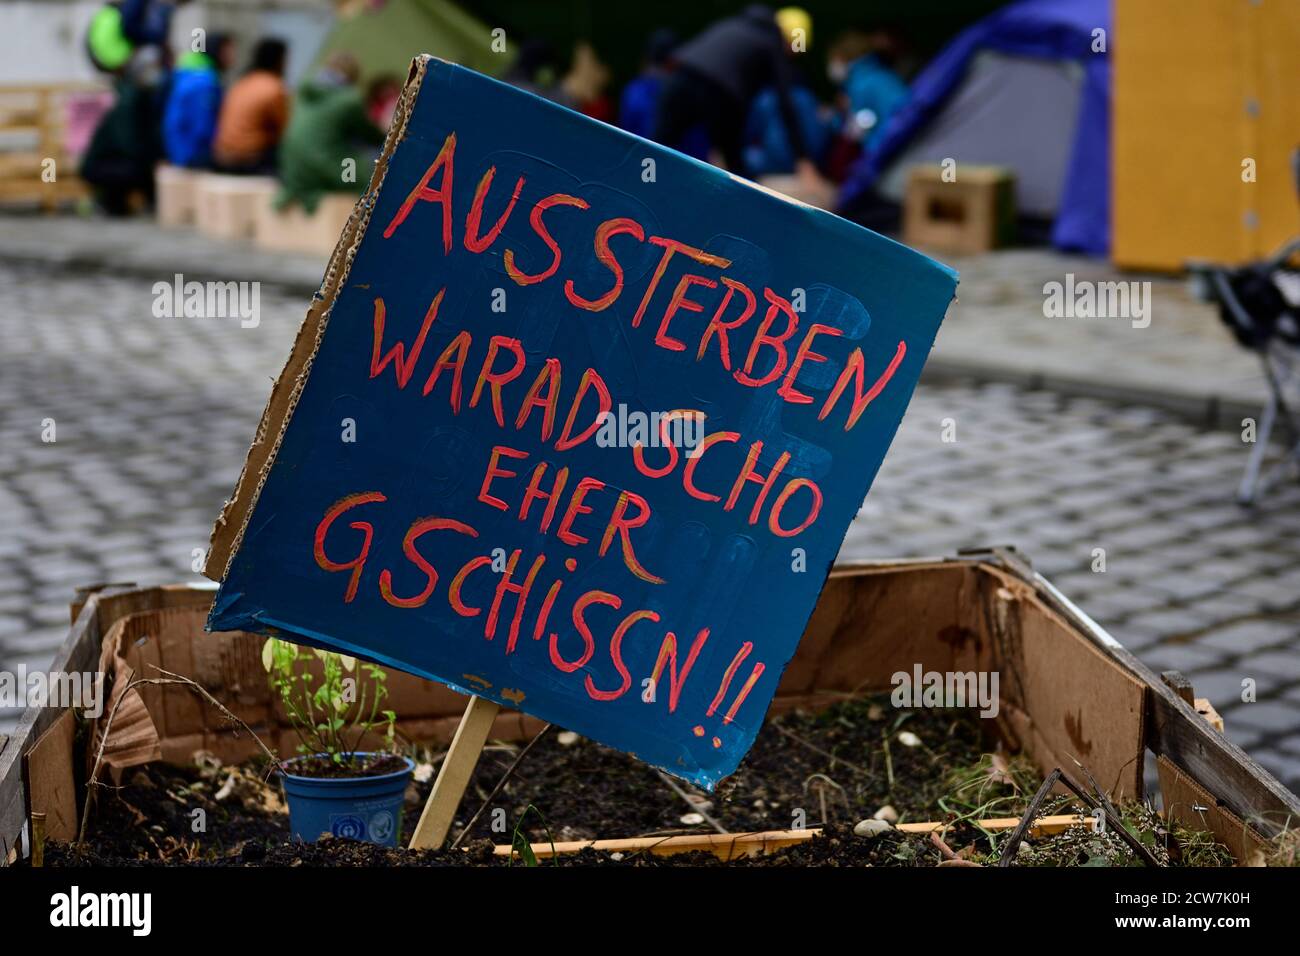 Vienna, Austria. 28th Sept 2020.  Extinction Rebellion Protest at Michaelerplatz in Vienna. At an event that was not registered according to the police, the activists occupied the square with tents and banners, among other things. Picture shows a board with the inscription 'Extinction would be rather crappy'. Credit: Franz Perc/Alamy Live News Stock Photo